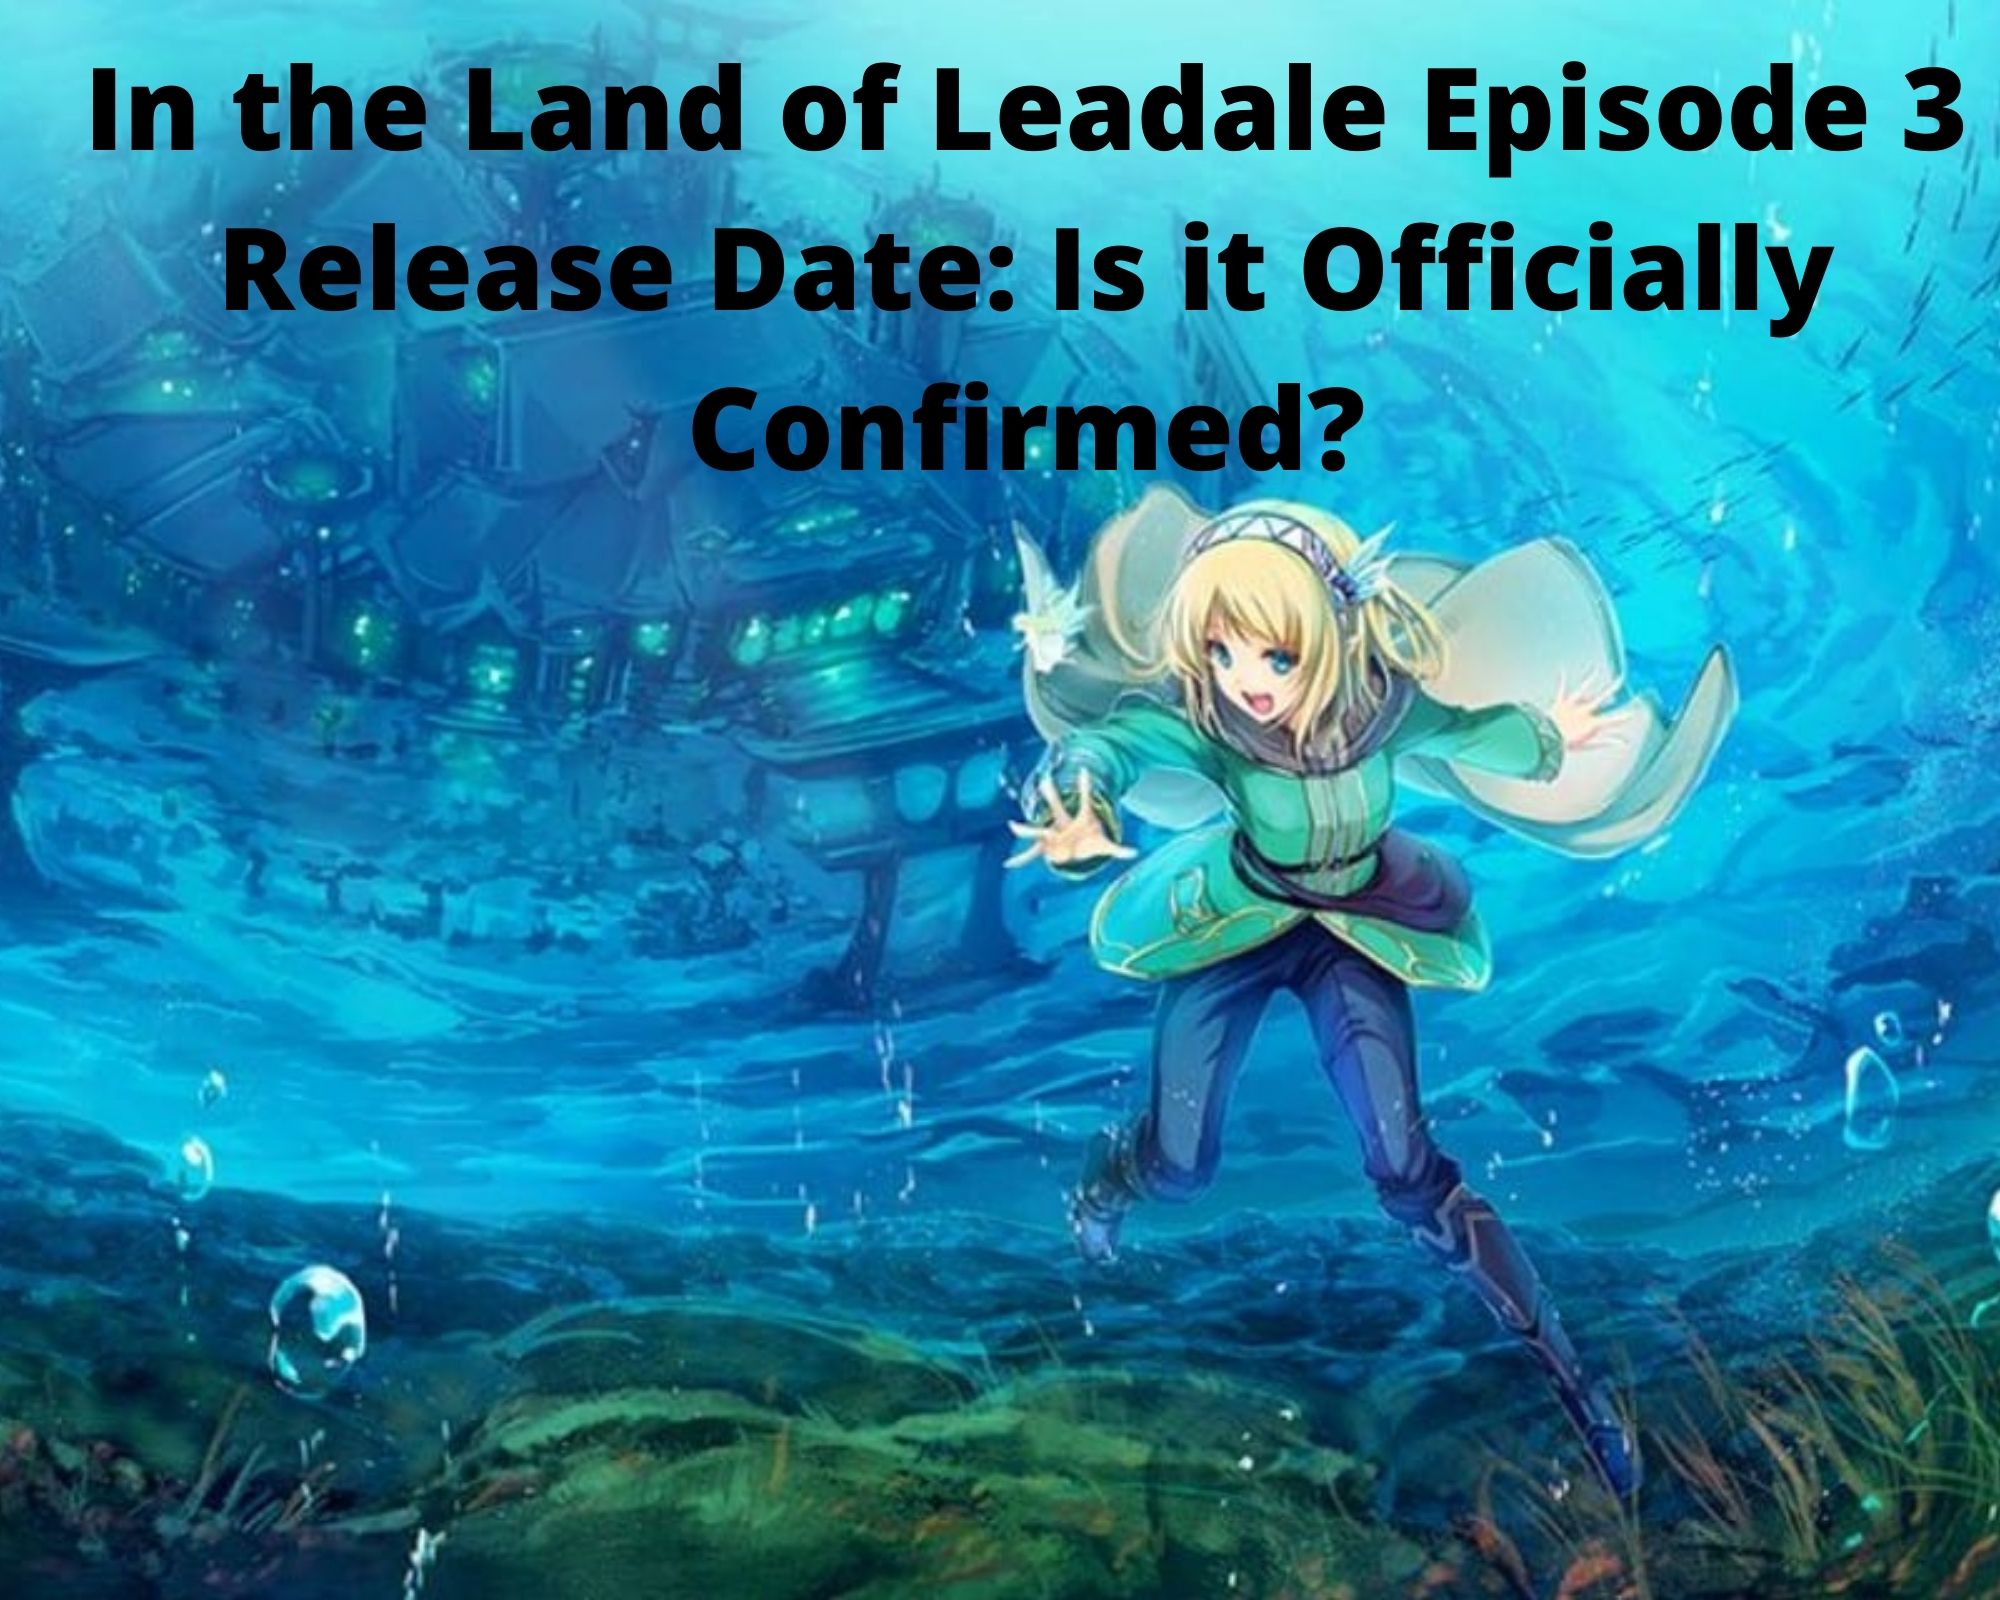 In the Land of Leadale Episode 3